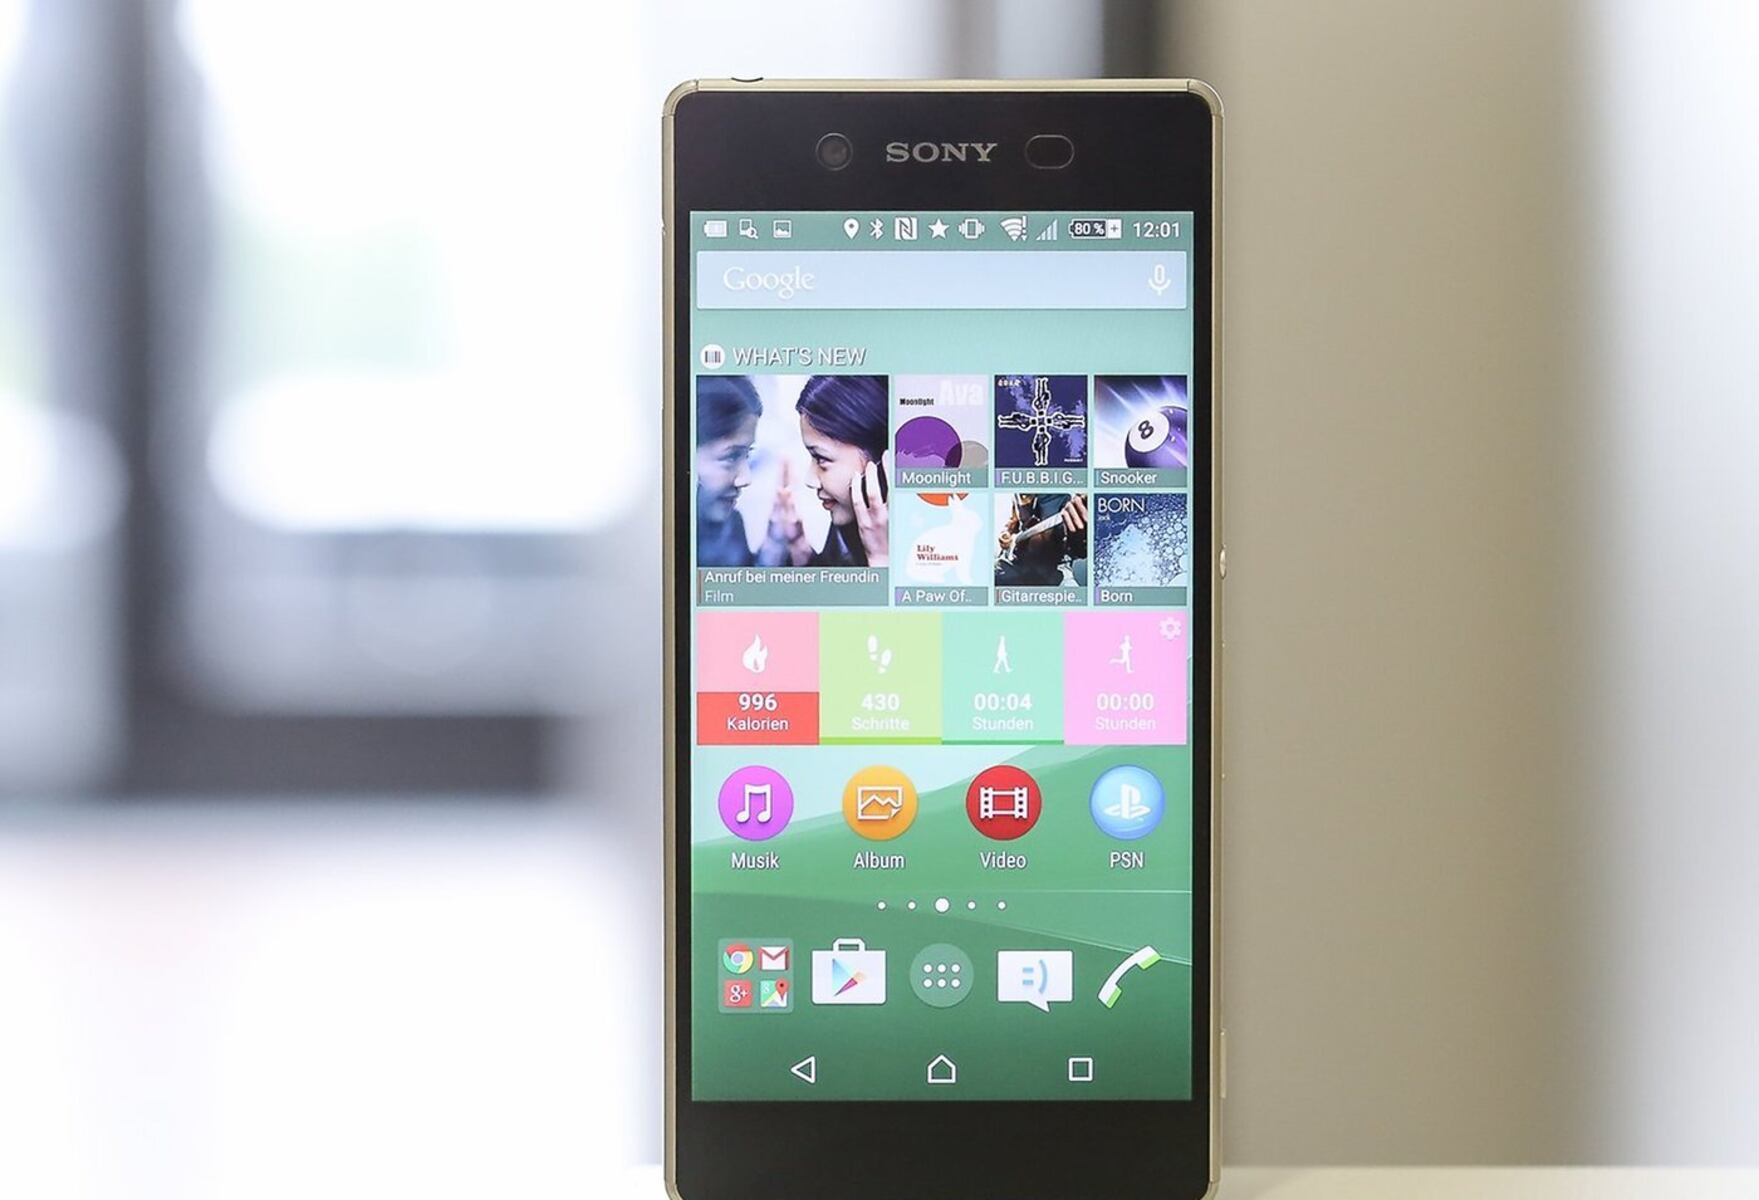 Verifying Authenticity: Check Sony Xperia Z3 Originality With IMEI